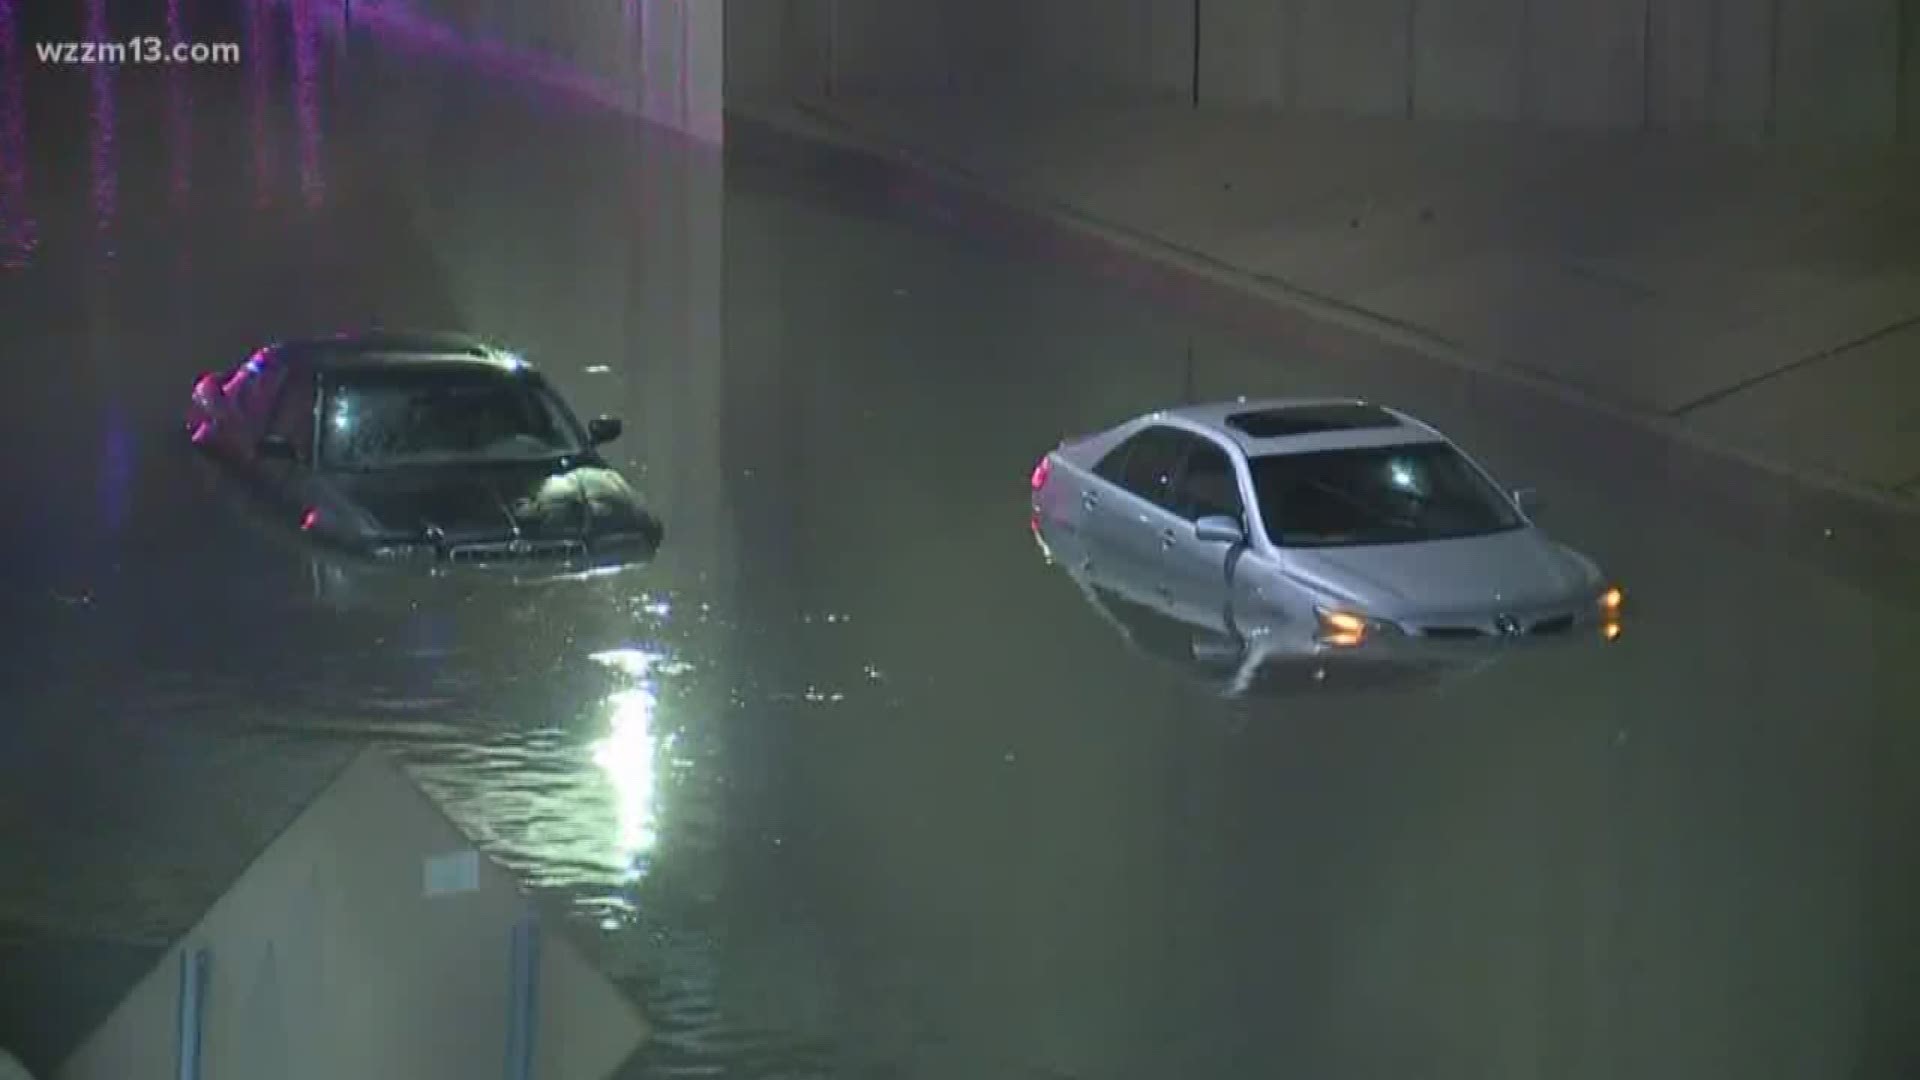 MDOT has closed a major freeway in both directions because of the flooding.